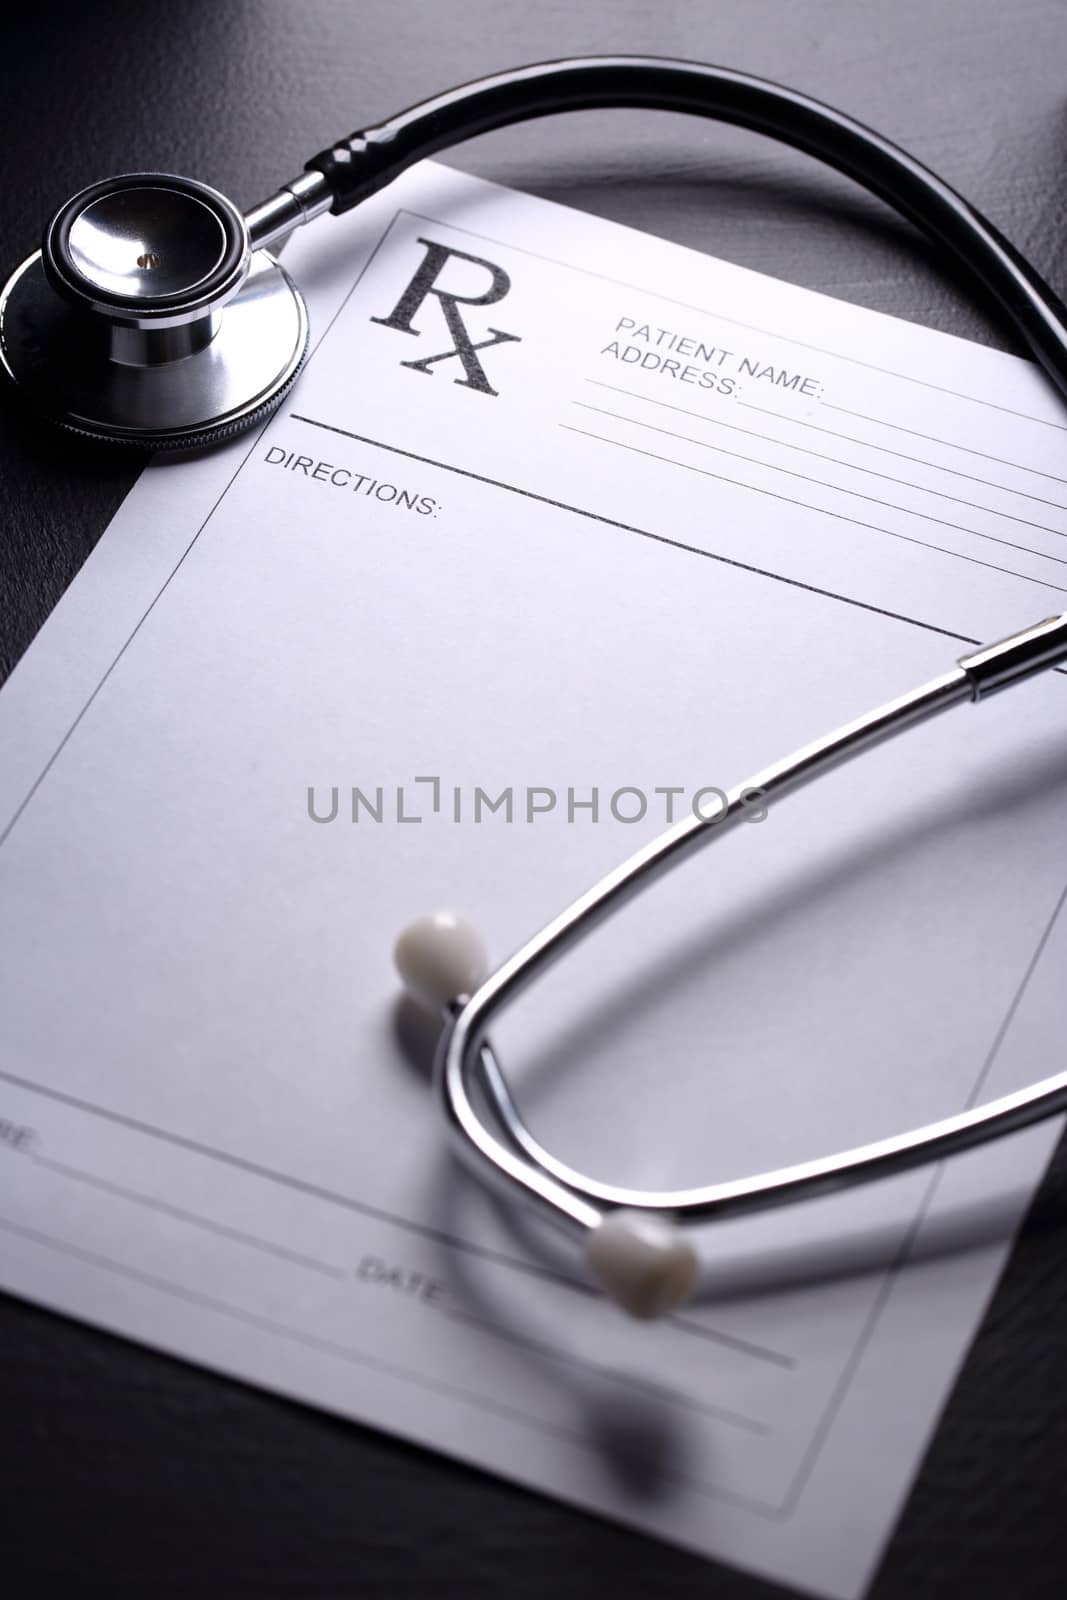 Stethoscope and patient list on black by Garsya